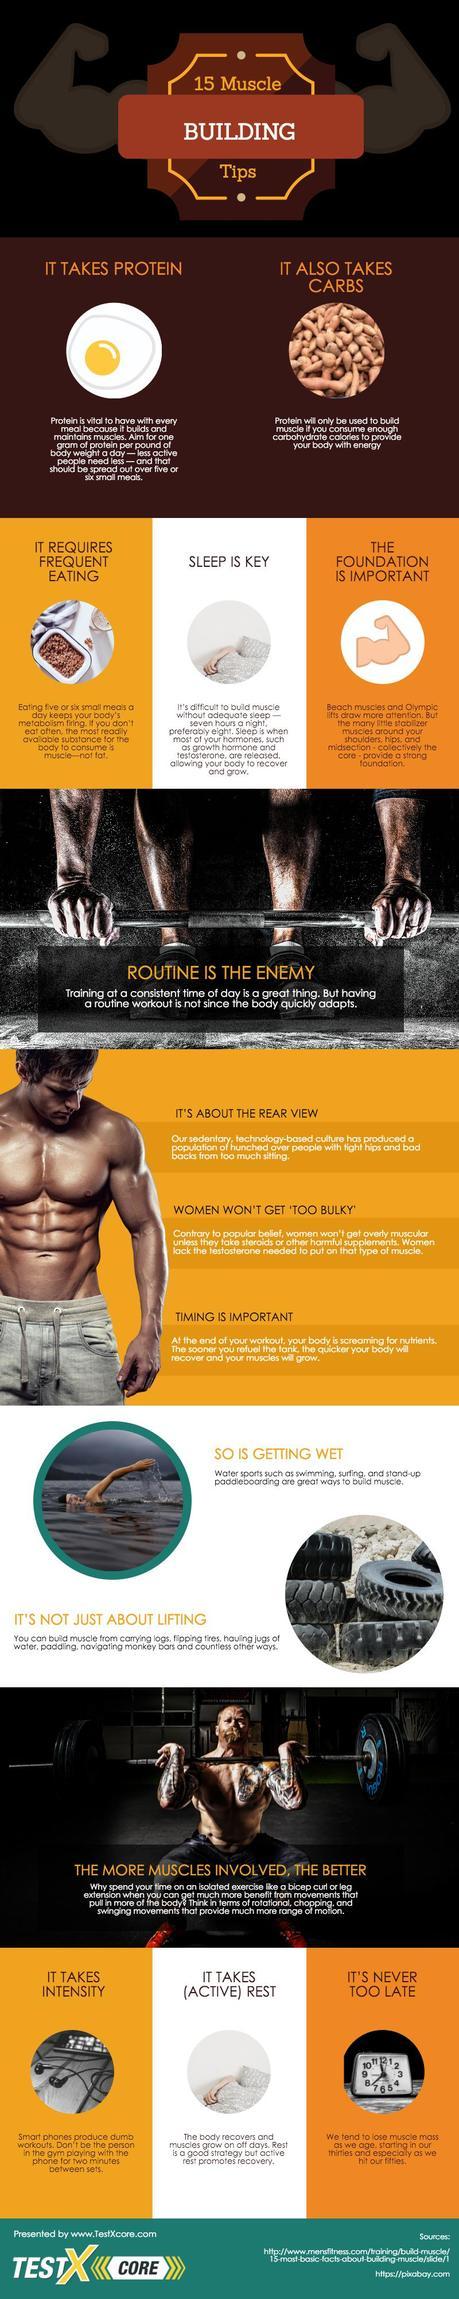 15 muscle building tips